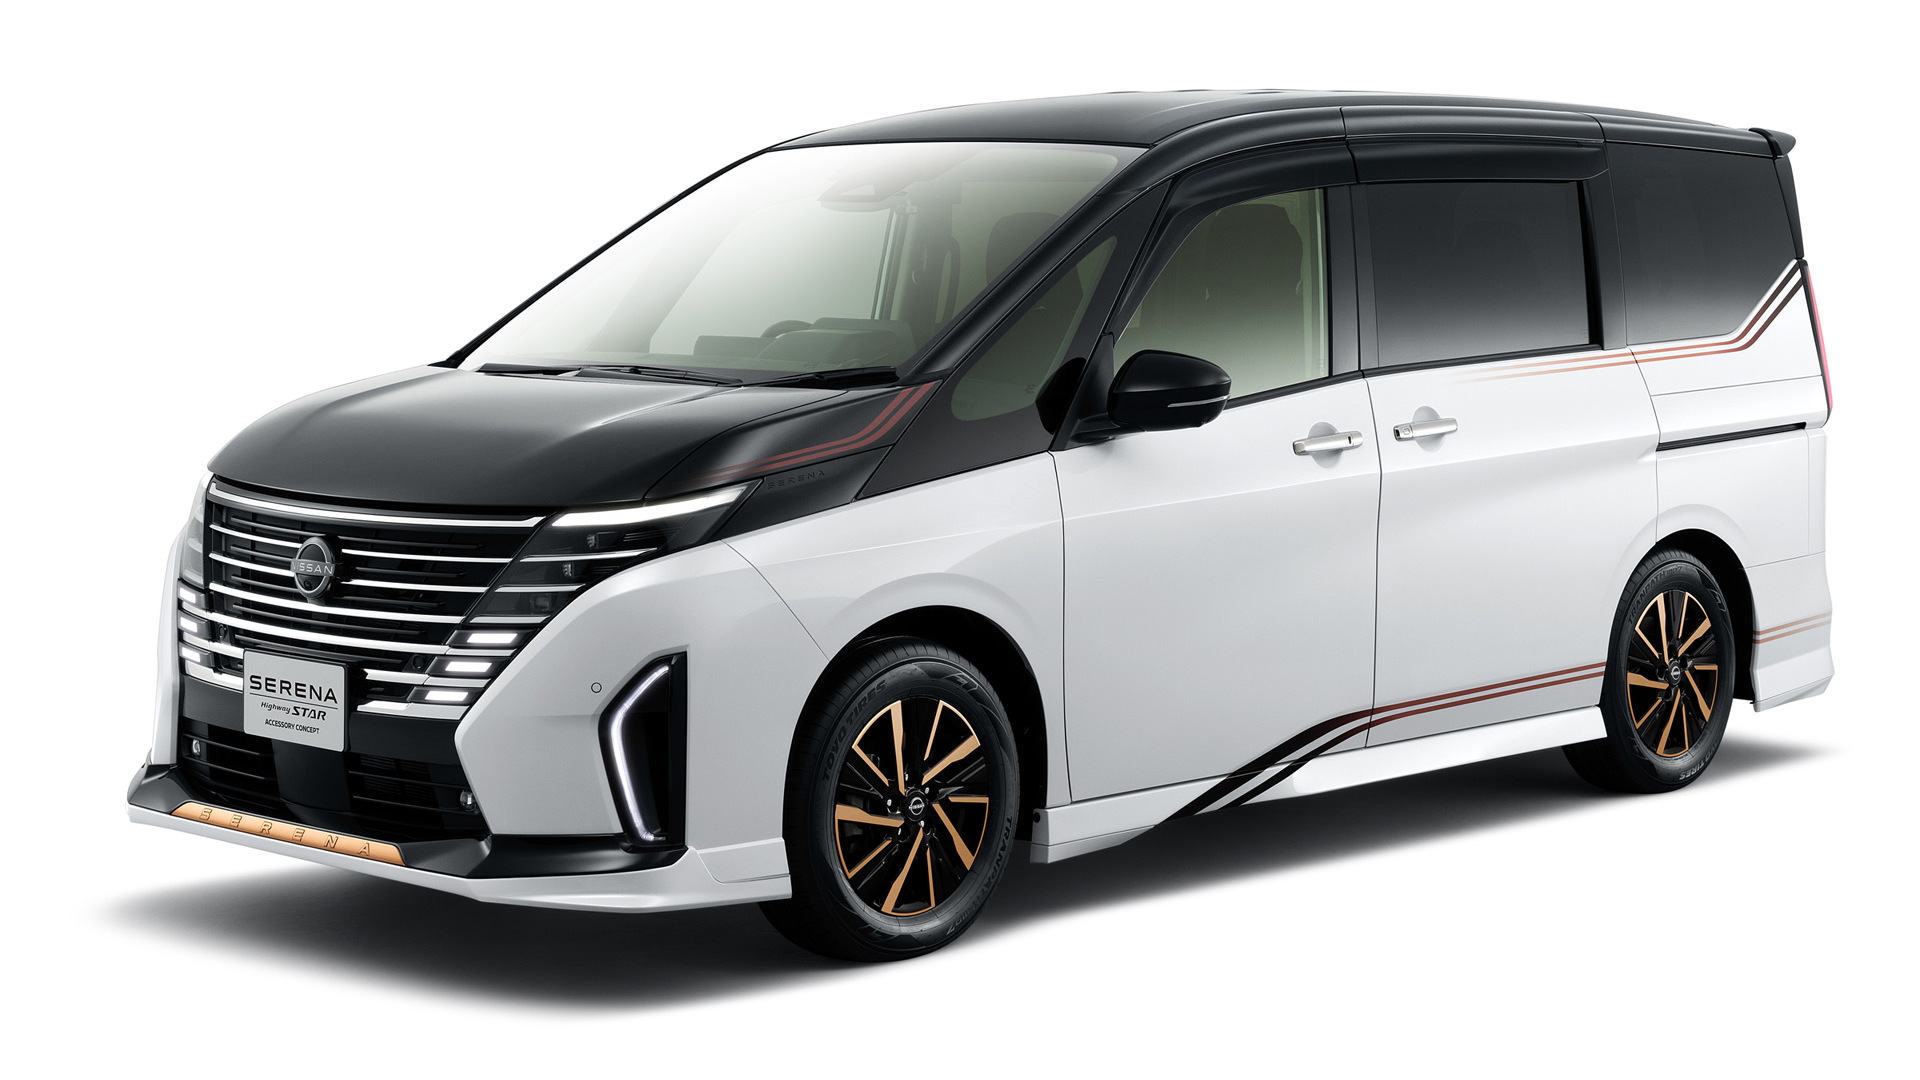 Nissan Serena Highway Star Accessory concept